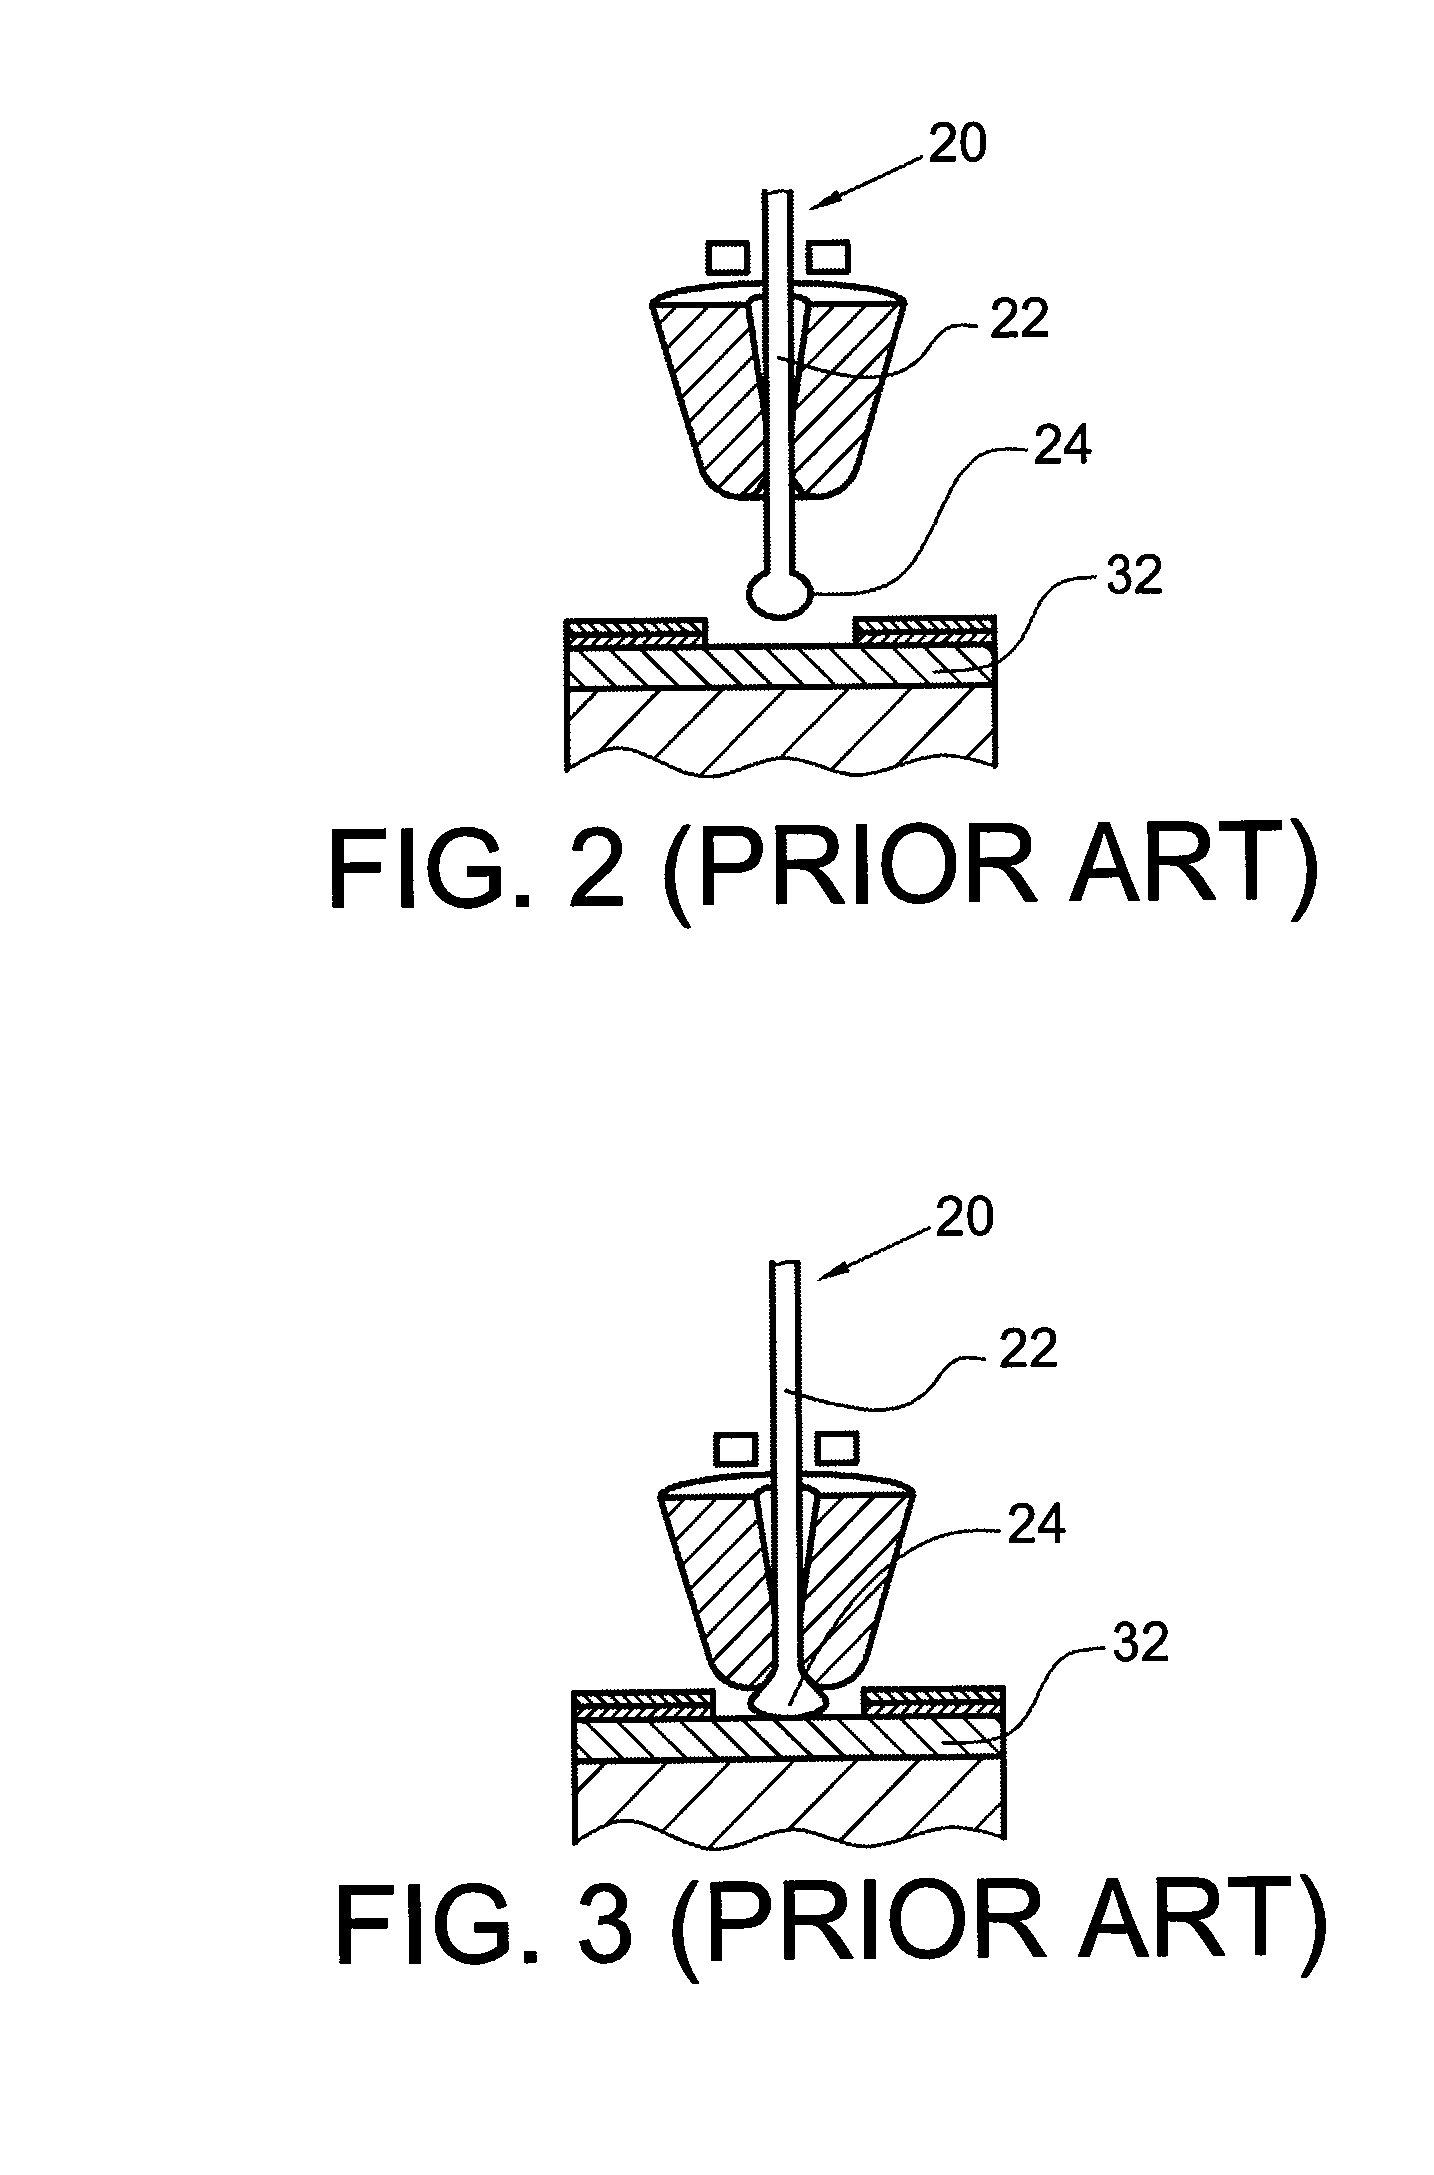 Semiconductor package and method for processing and bonding a wire